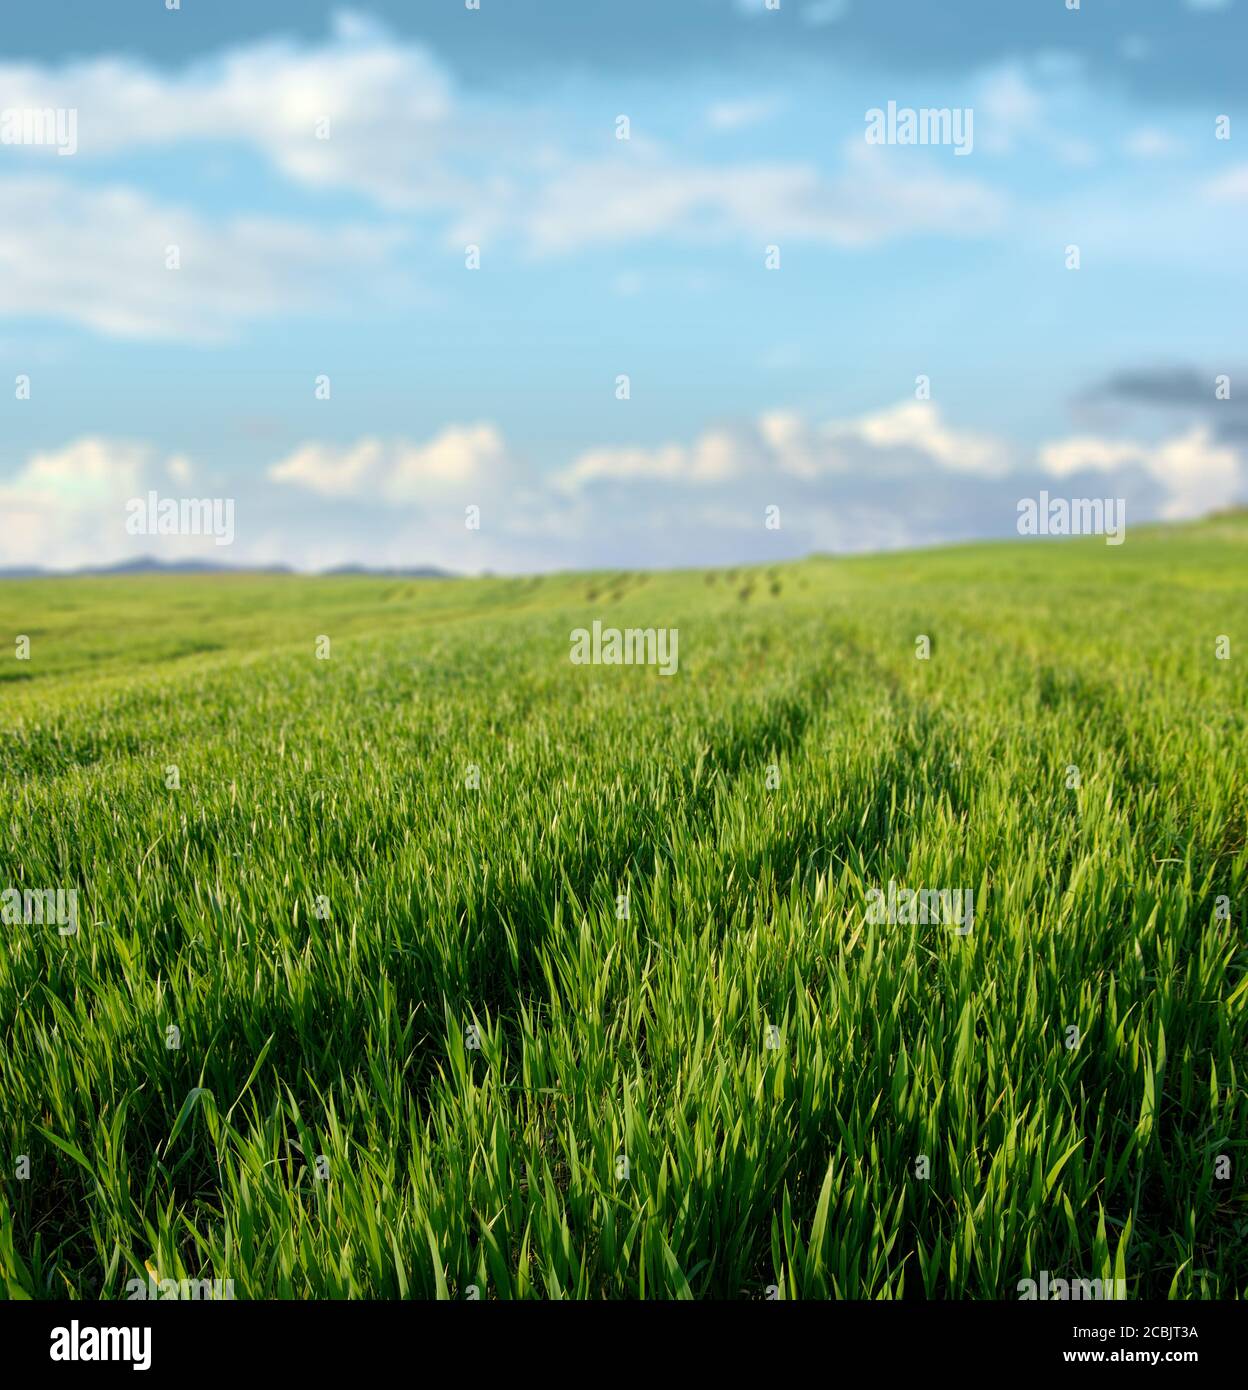 green grass scenery of Sicily agriculture, on background blurred sky and clouds Stock Photo